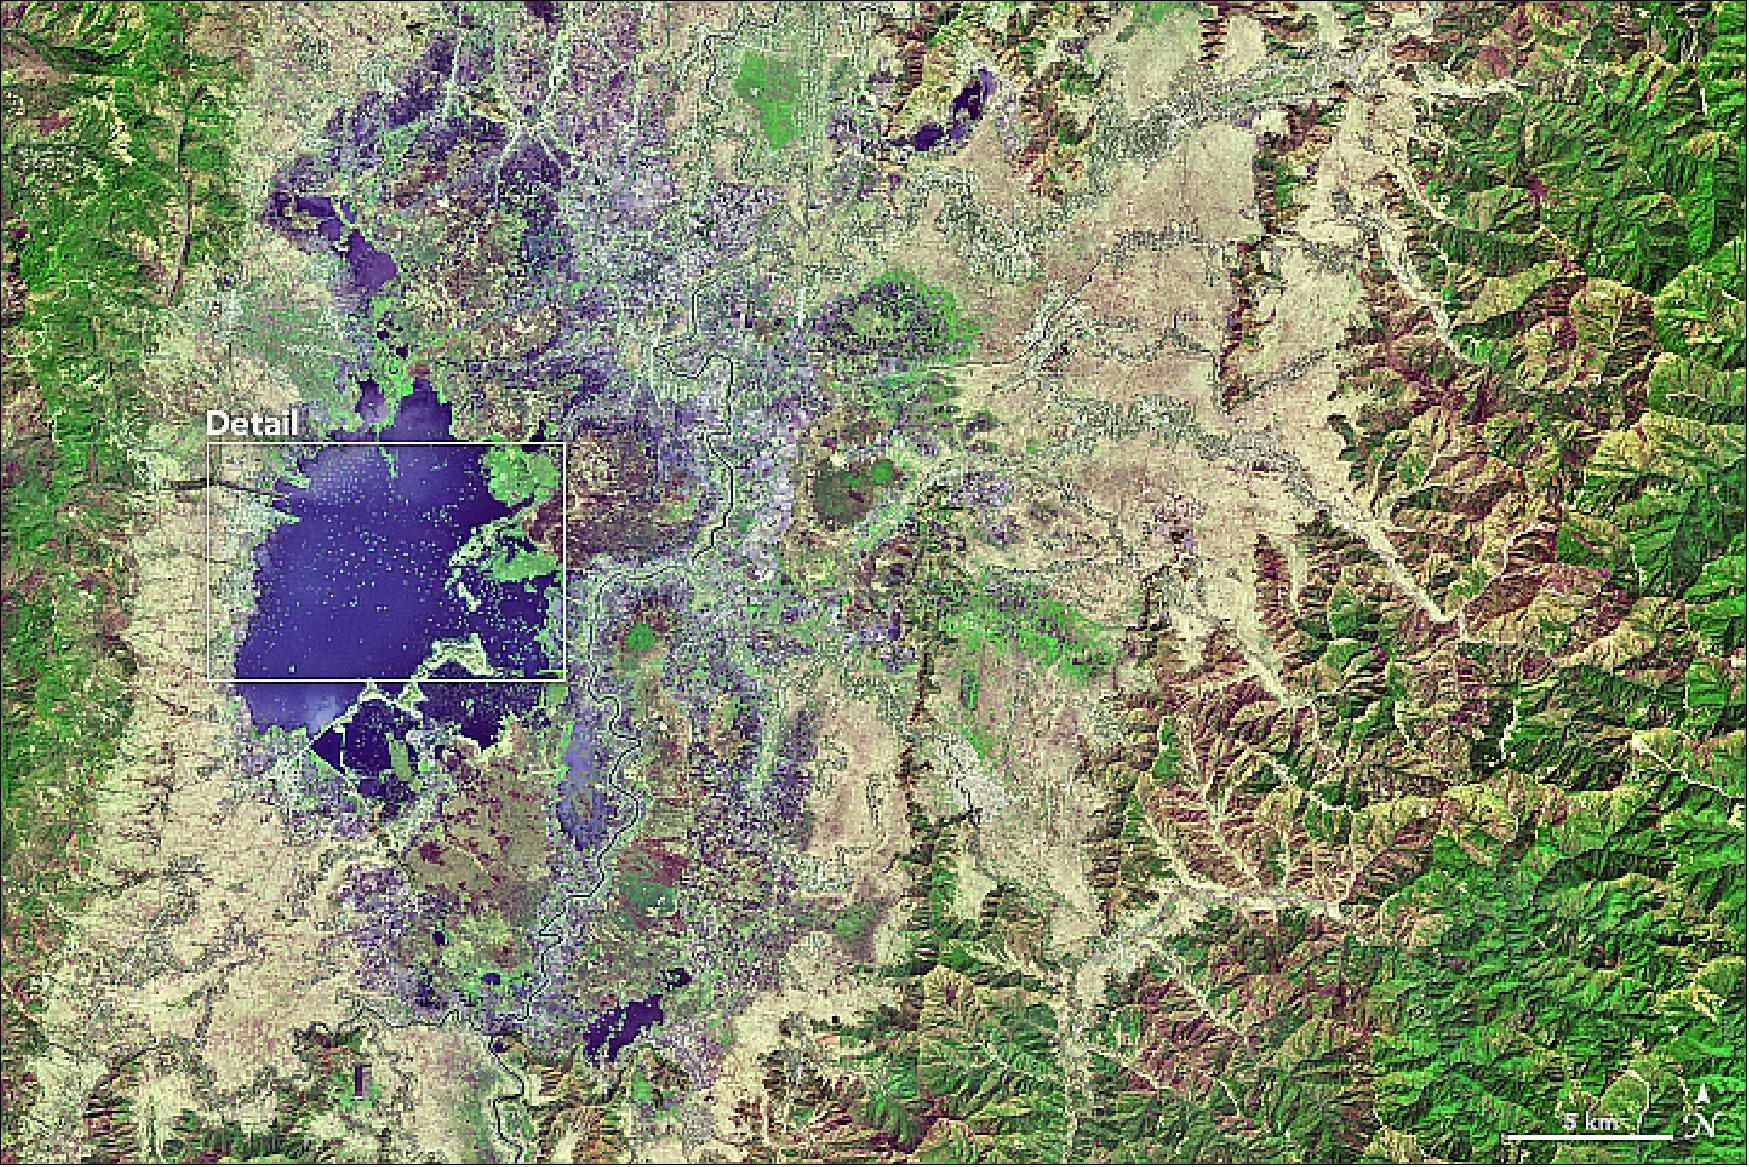 Figure 26: Overview image of Loktak Lake in India (image creedit: NASA Earth Observatory)